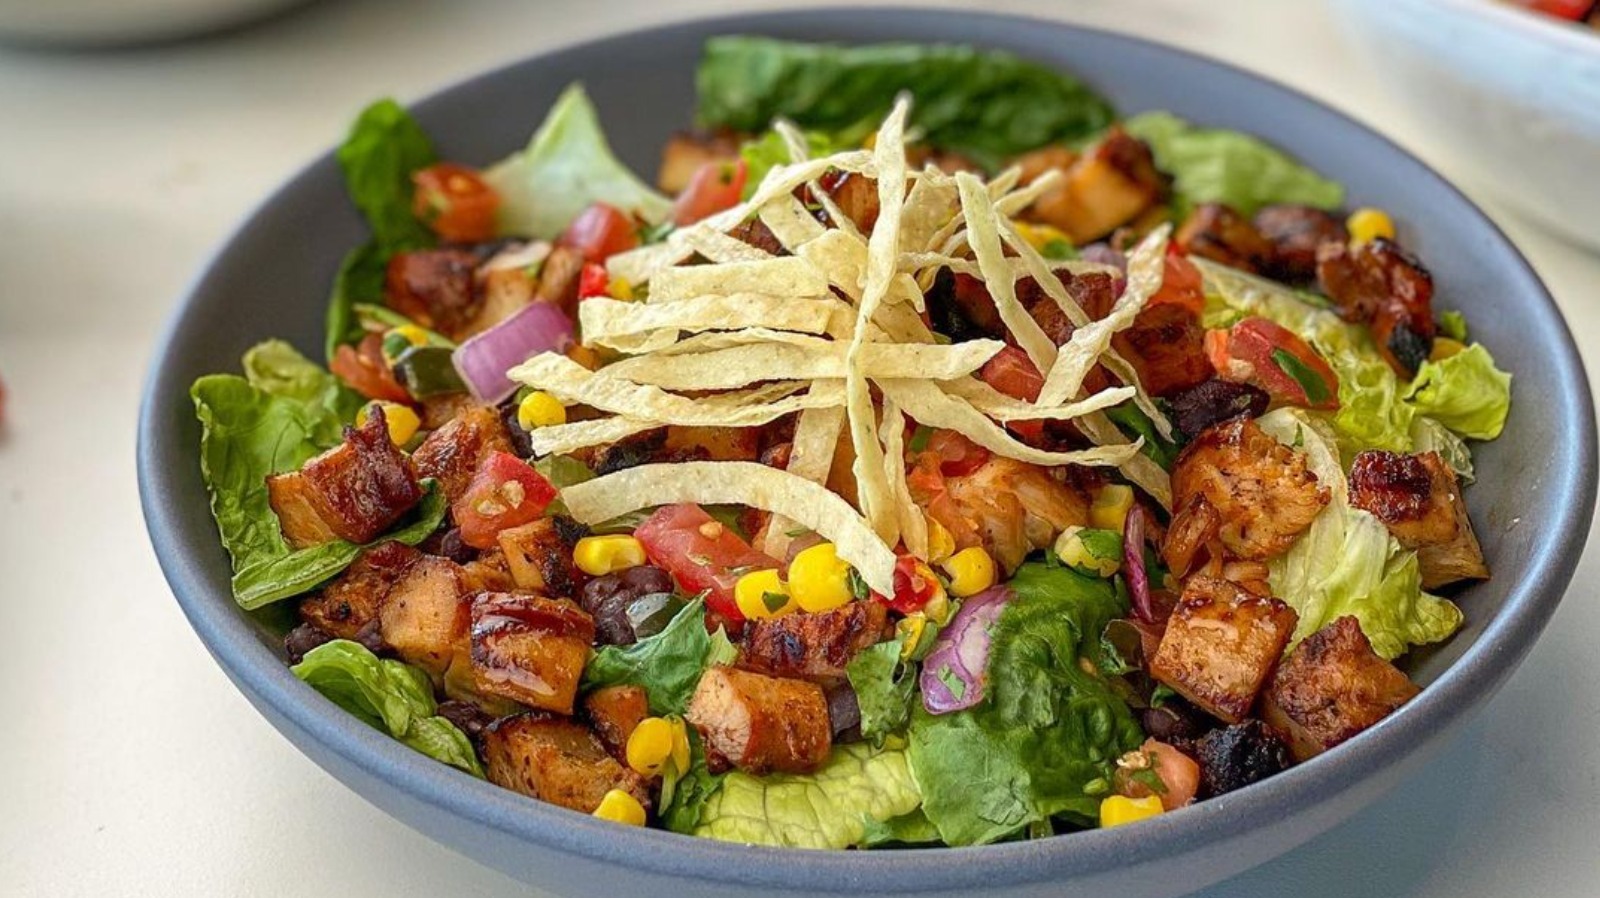 What is the healthiest bowl at Qdoba?